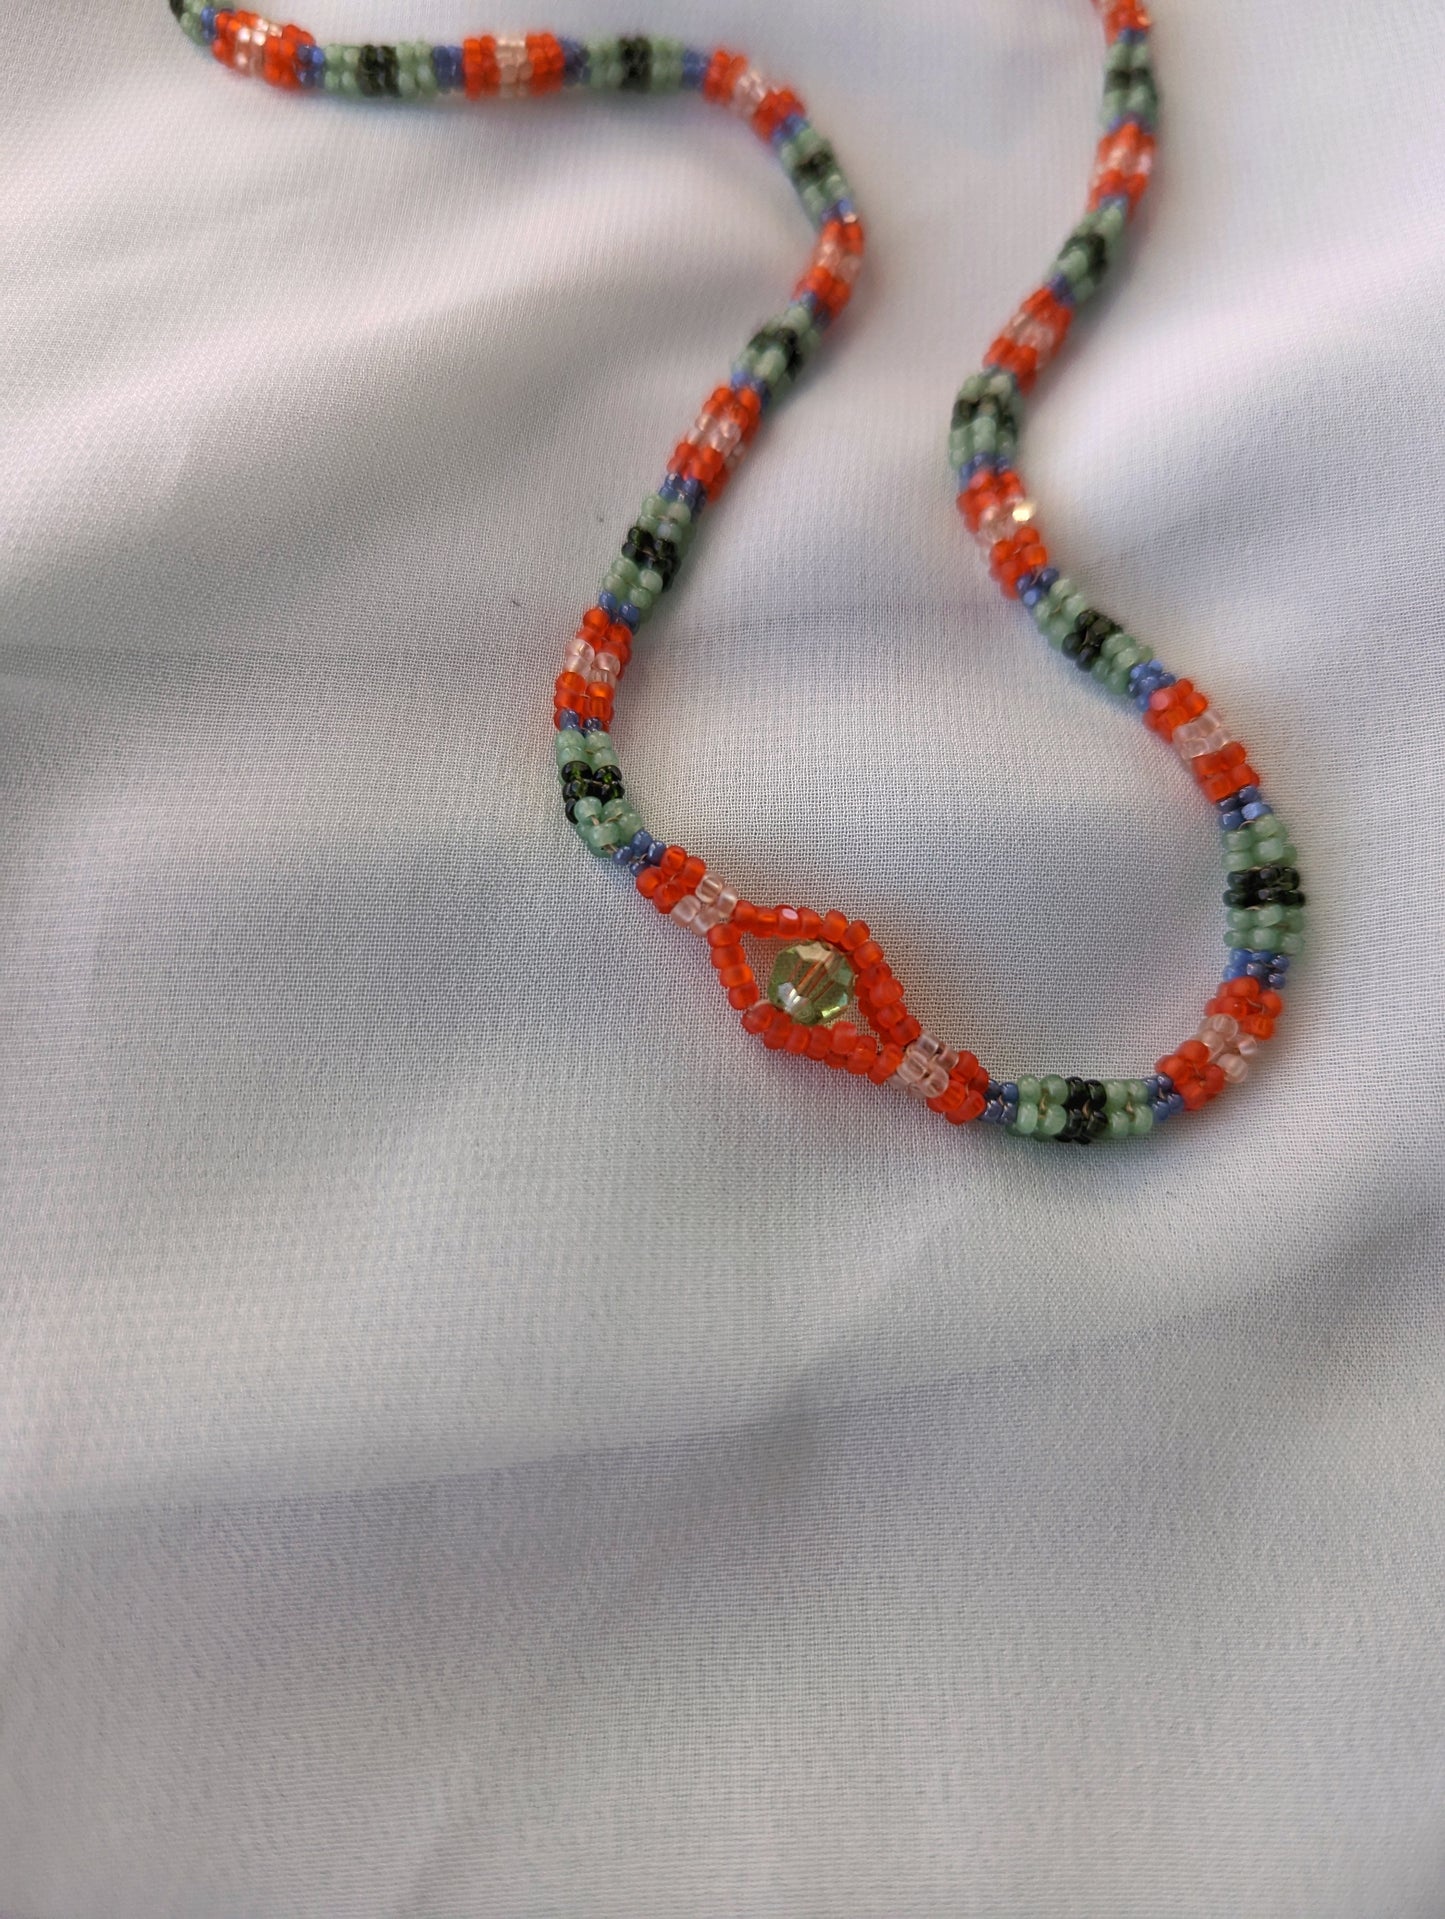 Coral Snake Choker - Peas & Carrots - Glimmer - 18 inches